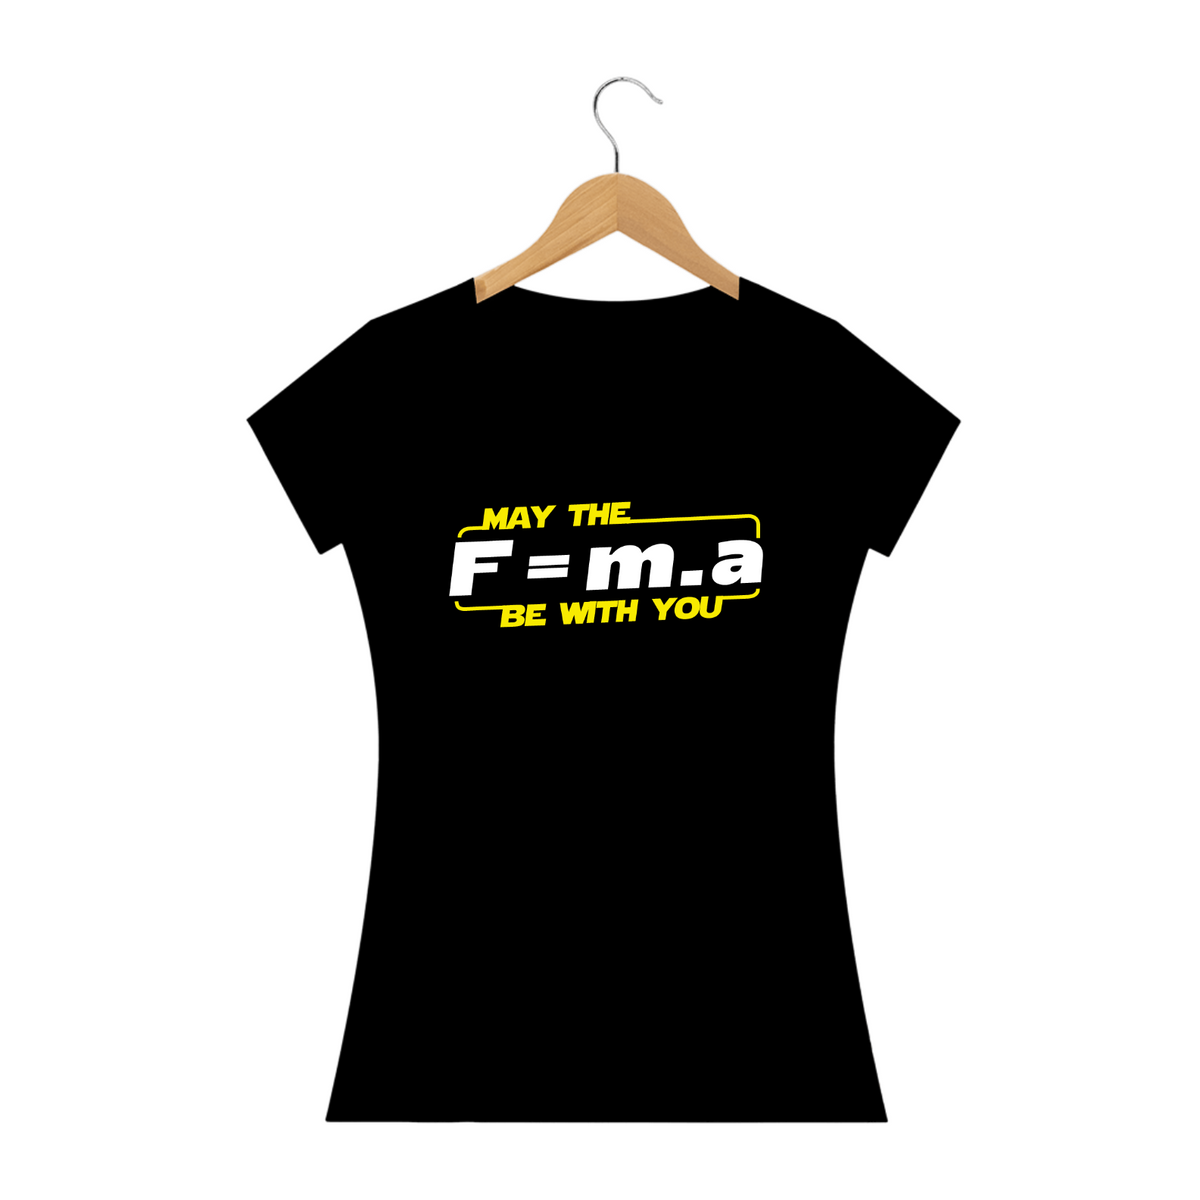 Nome do produto: May the F=m.a be with you (cores escuras)